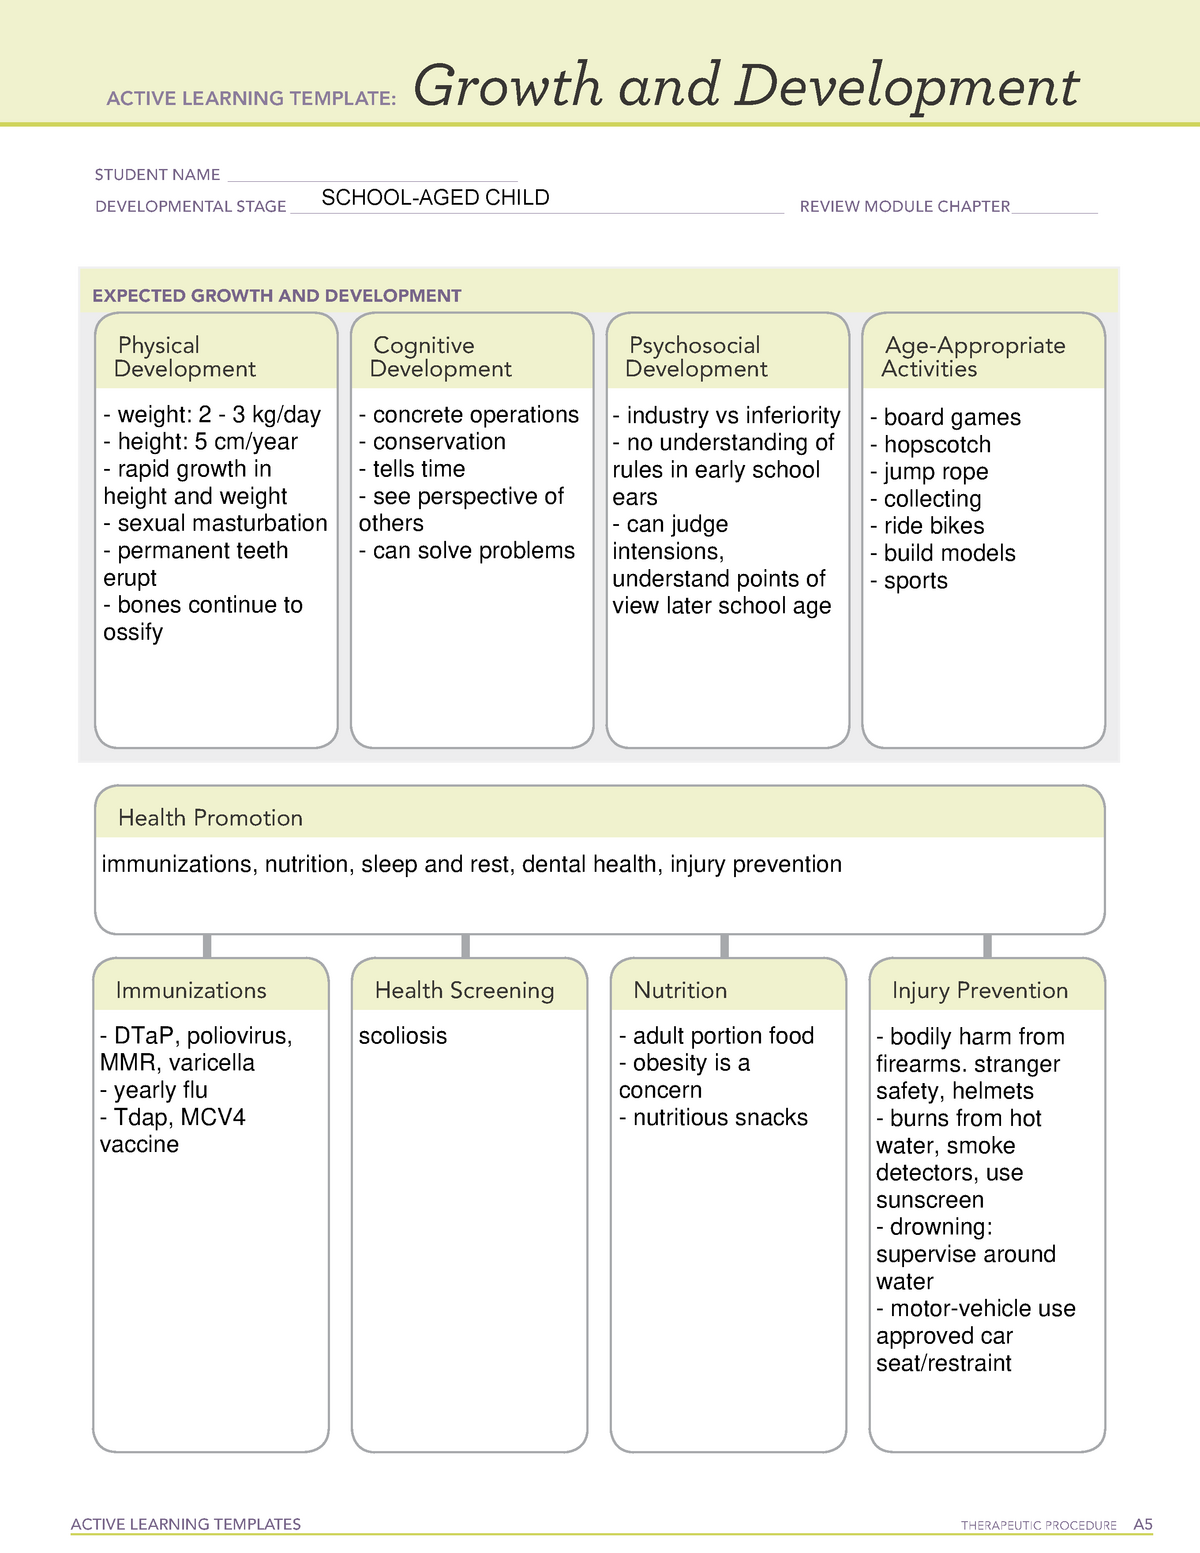 School AGED Growth And Development ATI Template ACTIVE LEARNING TEMPLATES THERAPEUTIC